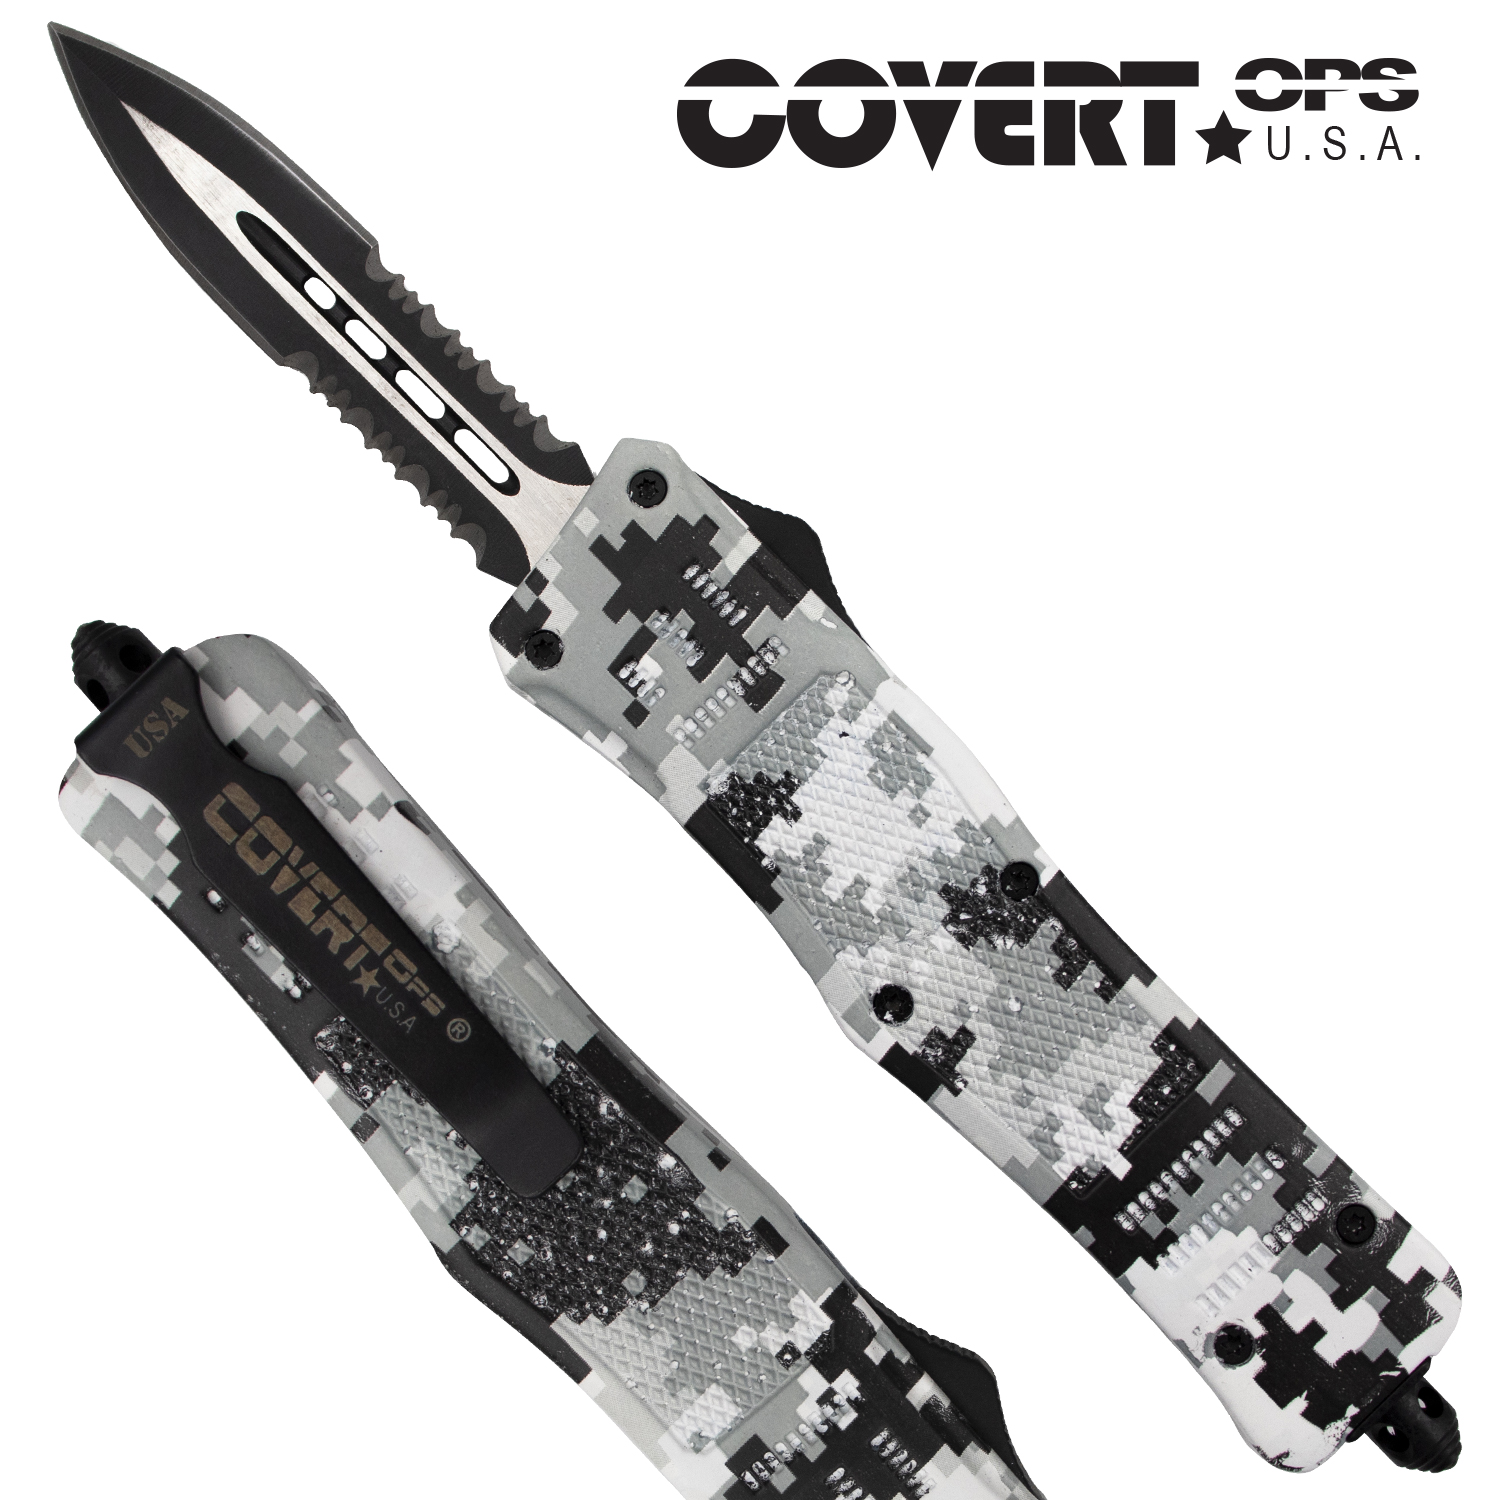 Covert OPS USA OTF Automatic Knife 8 inch overall Snow Camo Handle Two Tone Double Edge D2 Steel Blade